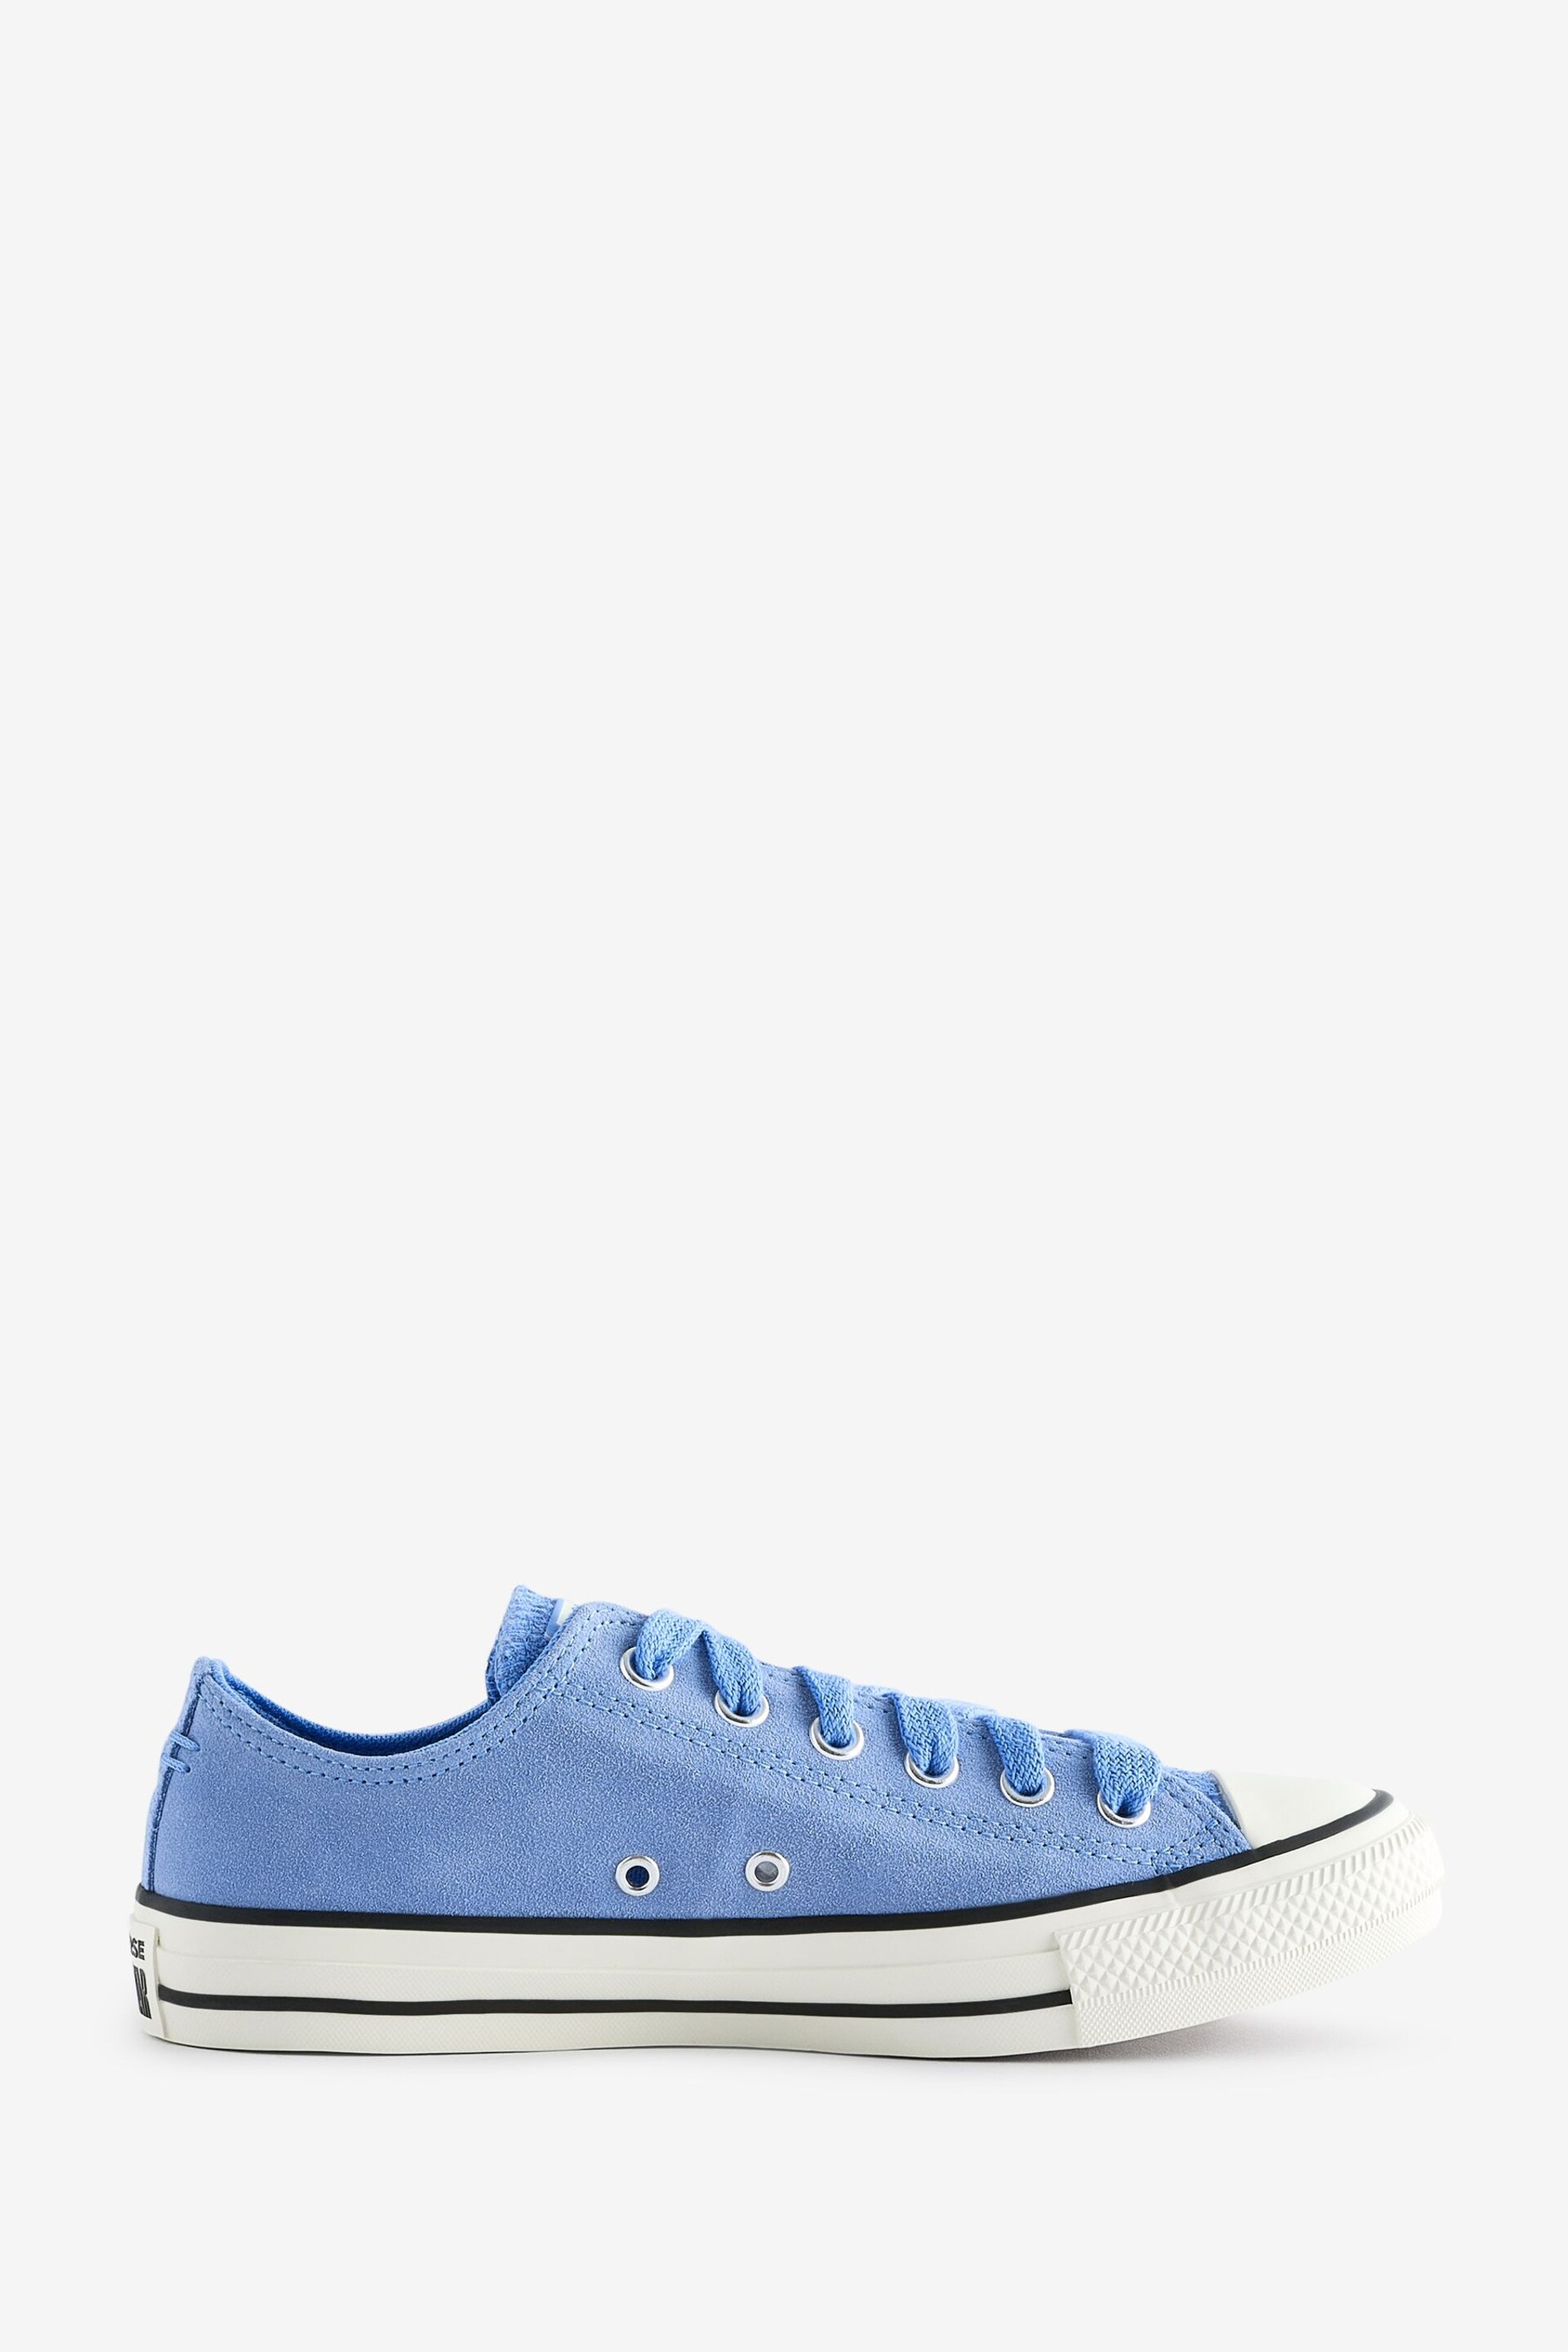 Converse Light Blue Chuck Taylor All Star Suede Ox Trainers - Image 1 of 9